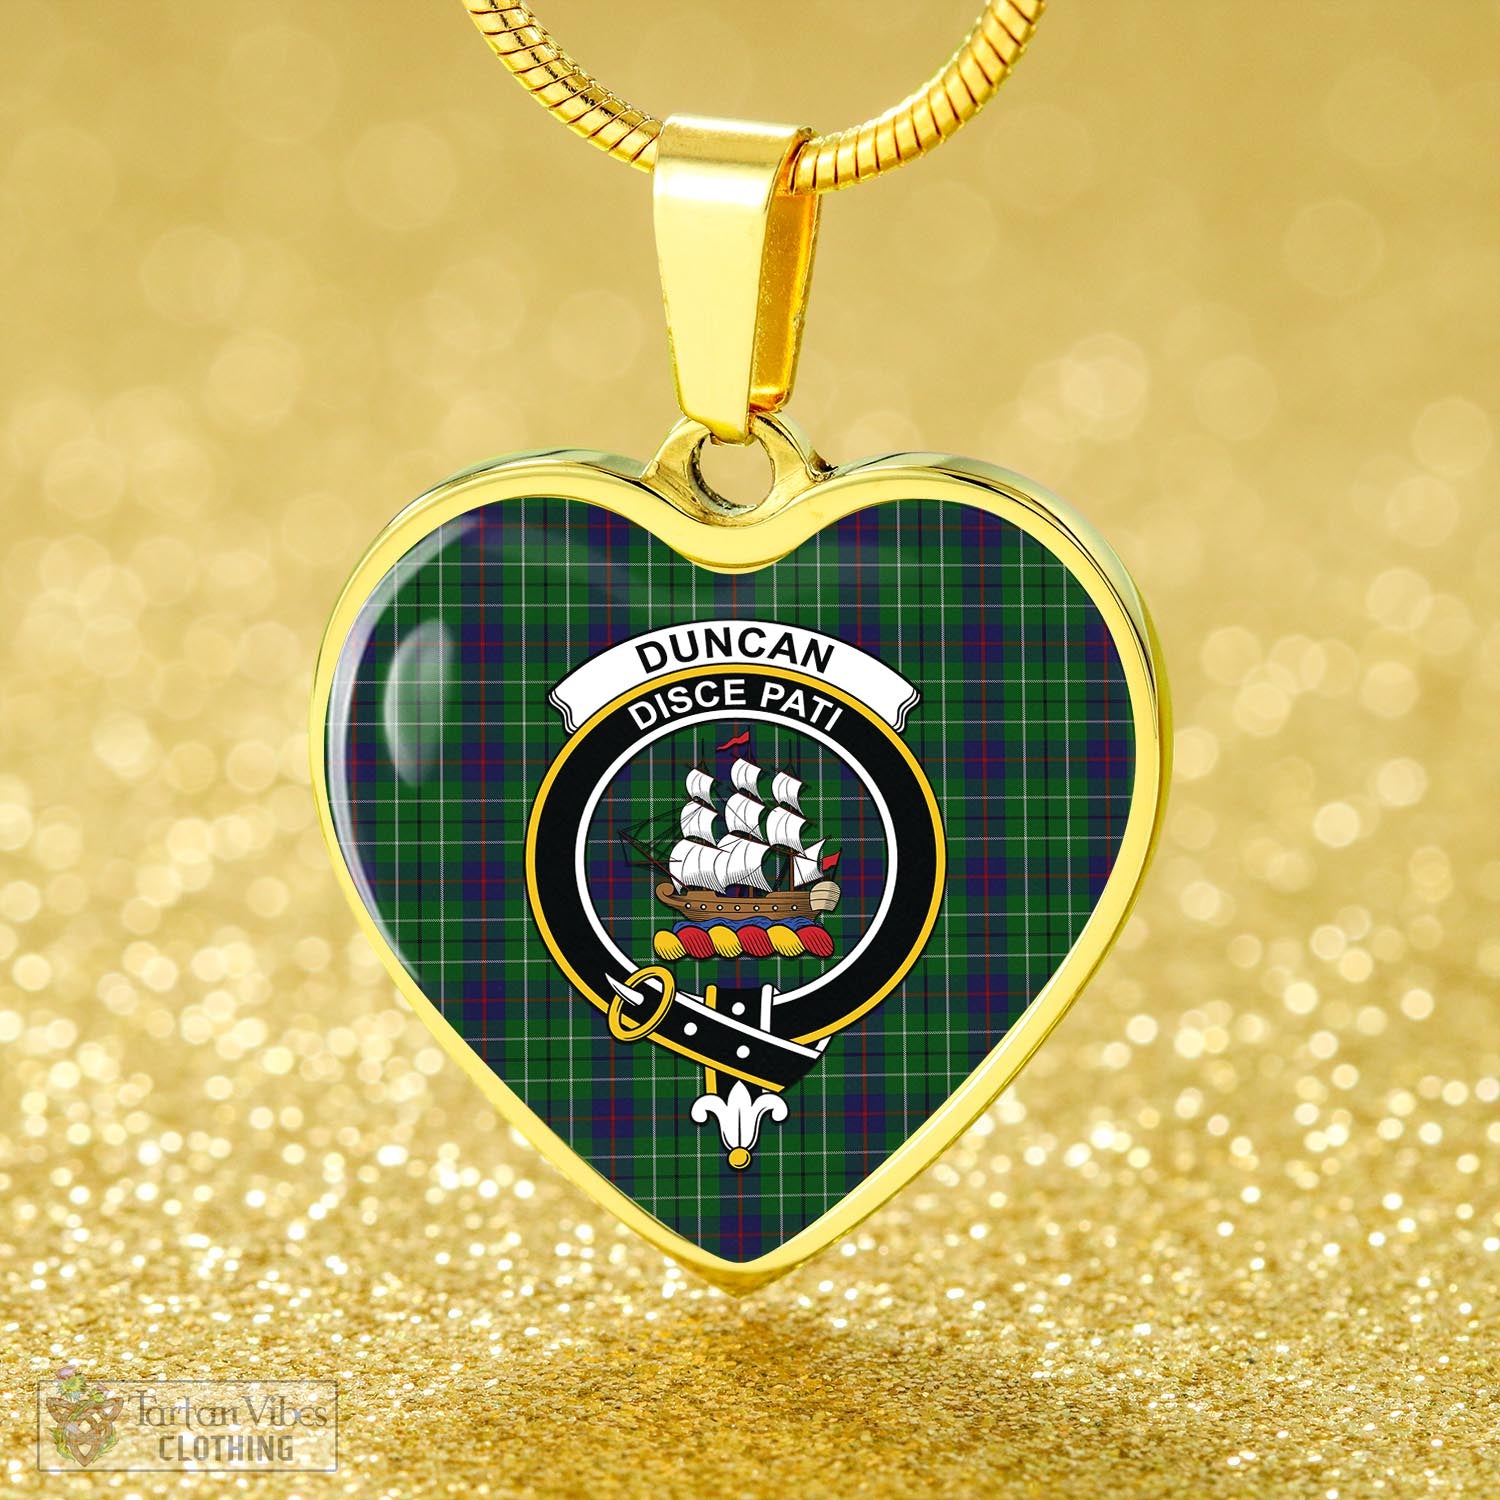 Tartan Vibes Clothing Duncan Tartan Heart Necklace with Family Crest